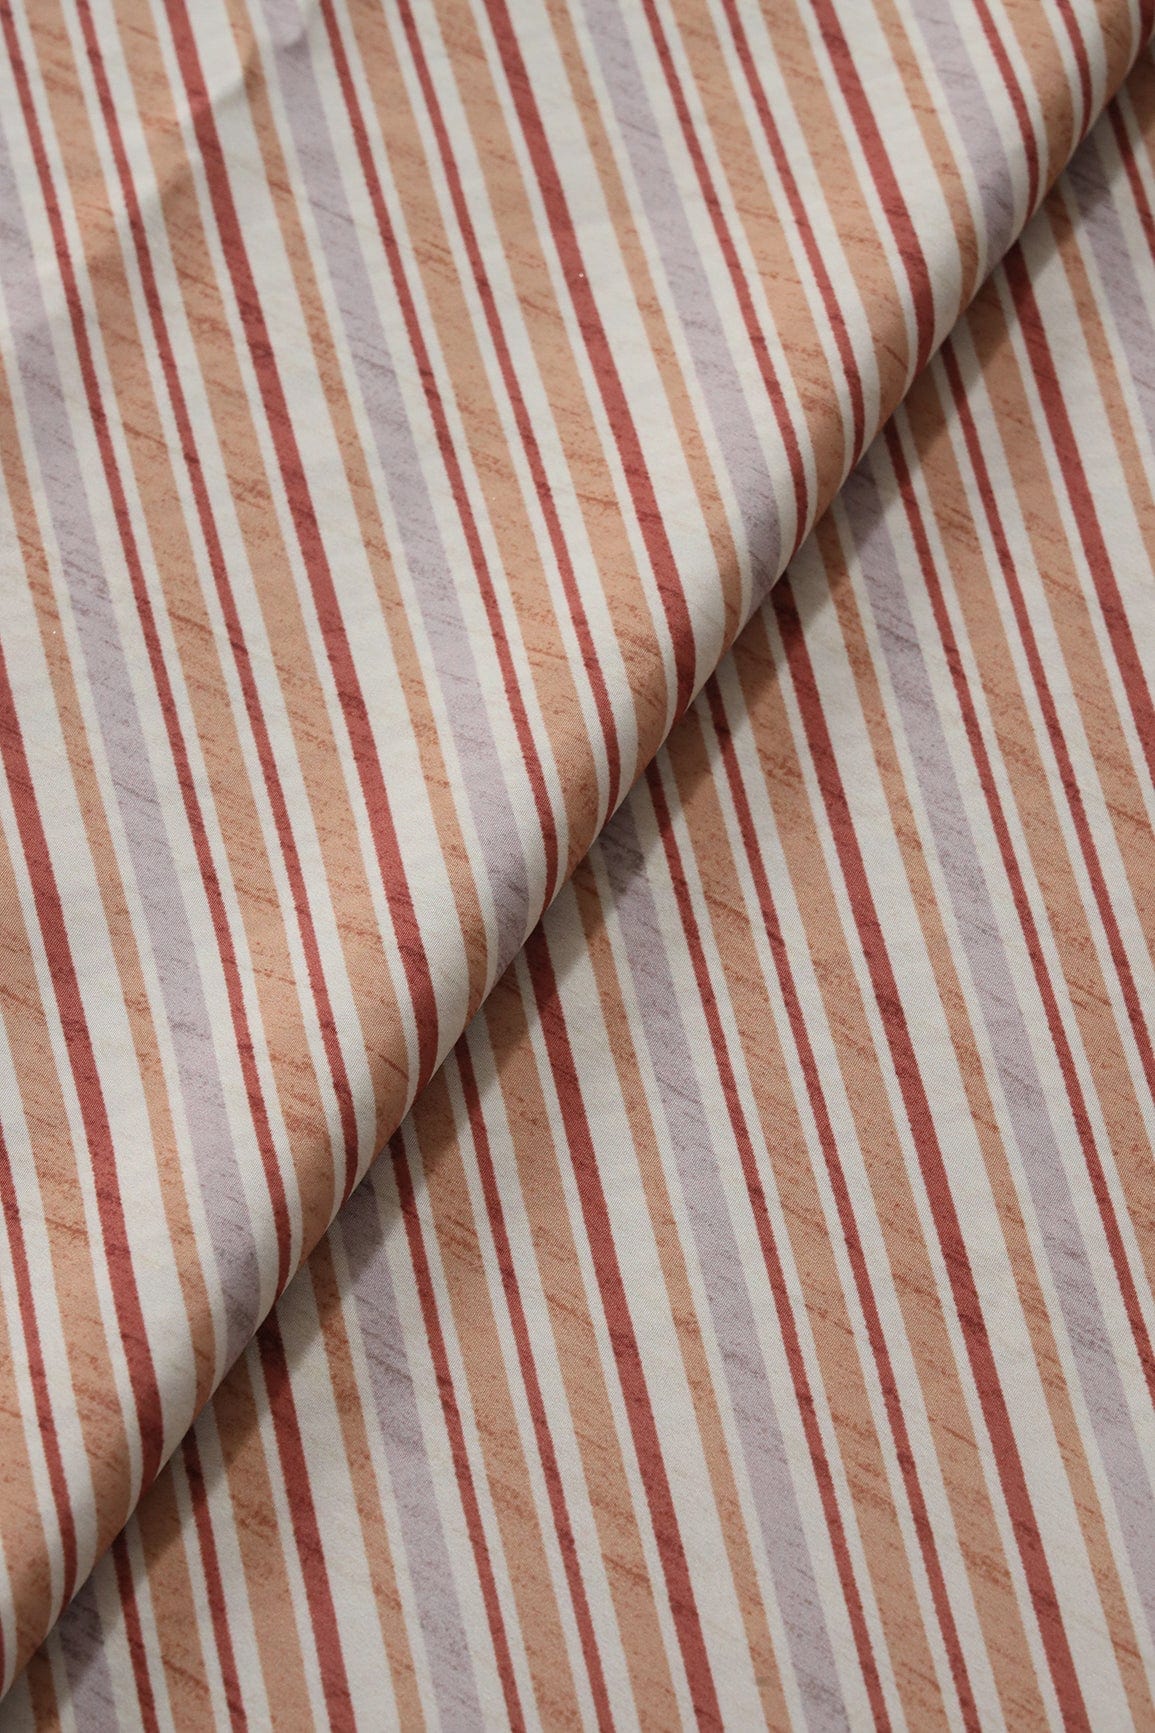 doeraa Prints Brown And Beige Stripes Pattern Digital Print On Cream French Crepe Fabric